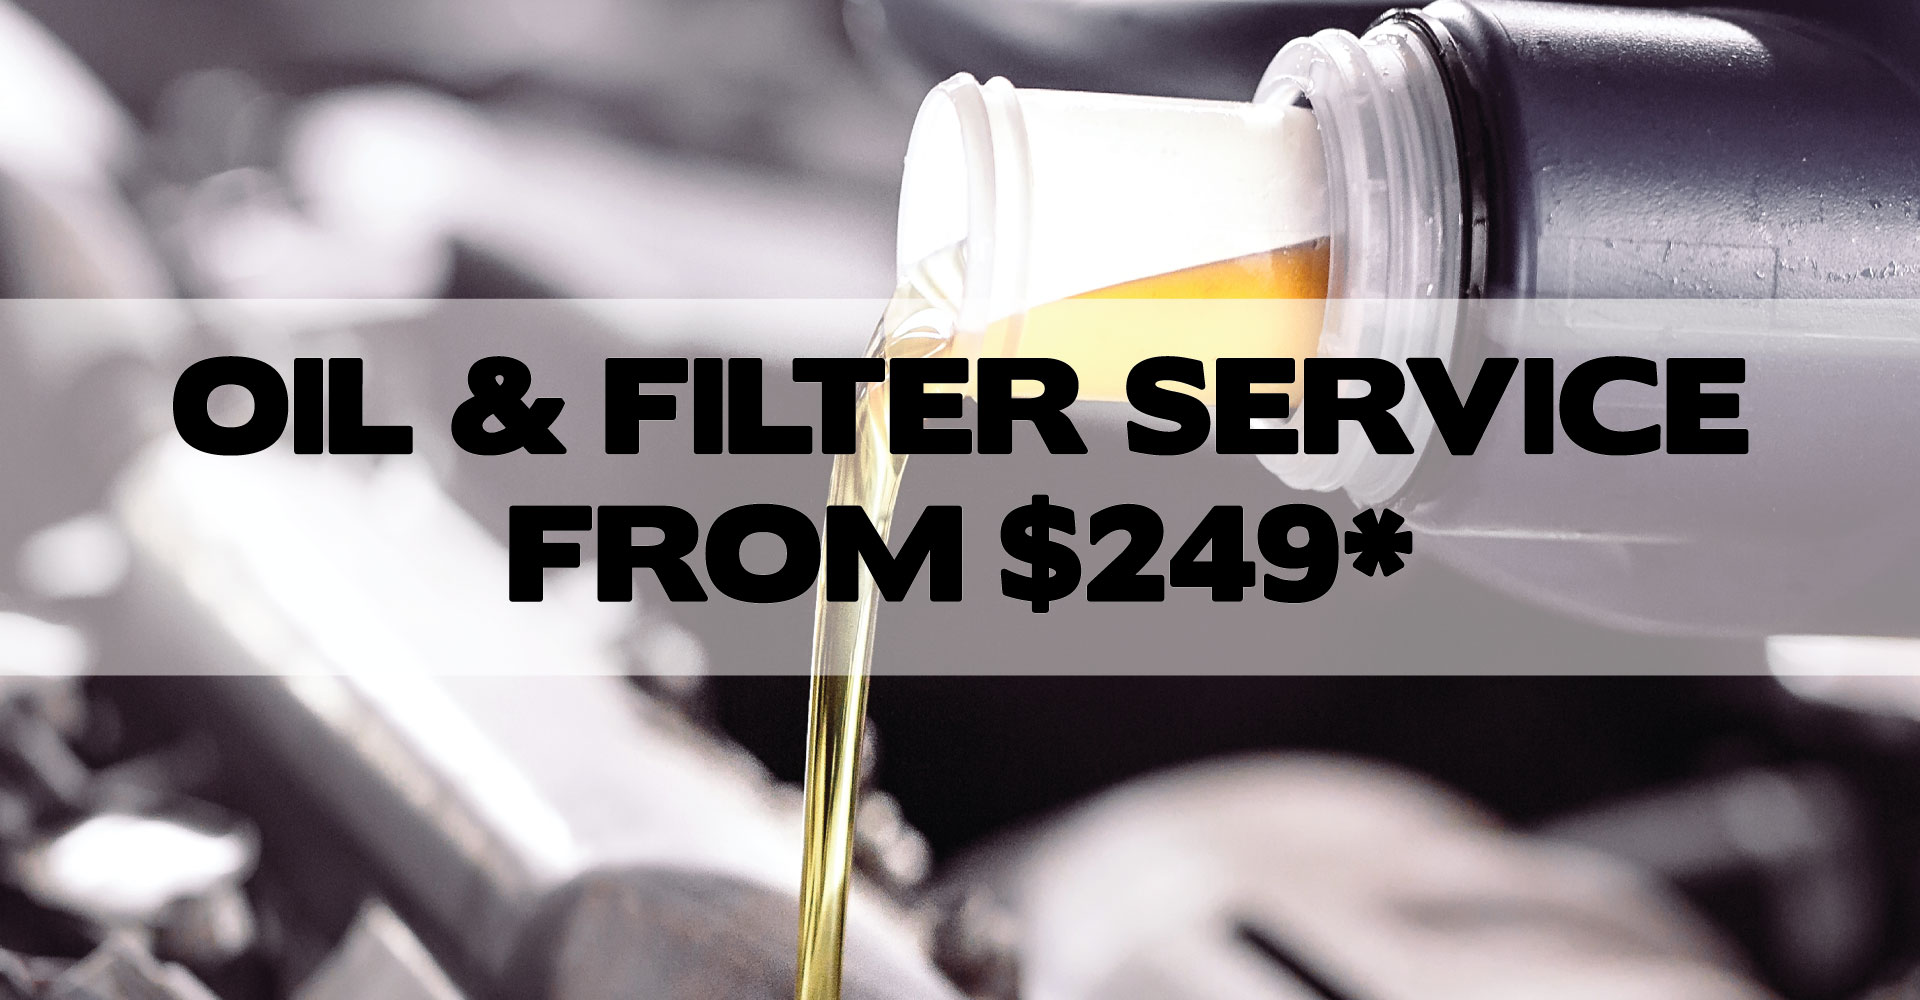 OIL & FILTER GENERAL SERVICE FROM $249*